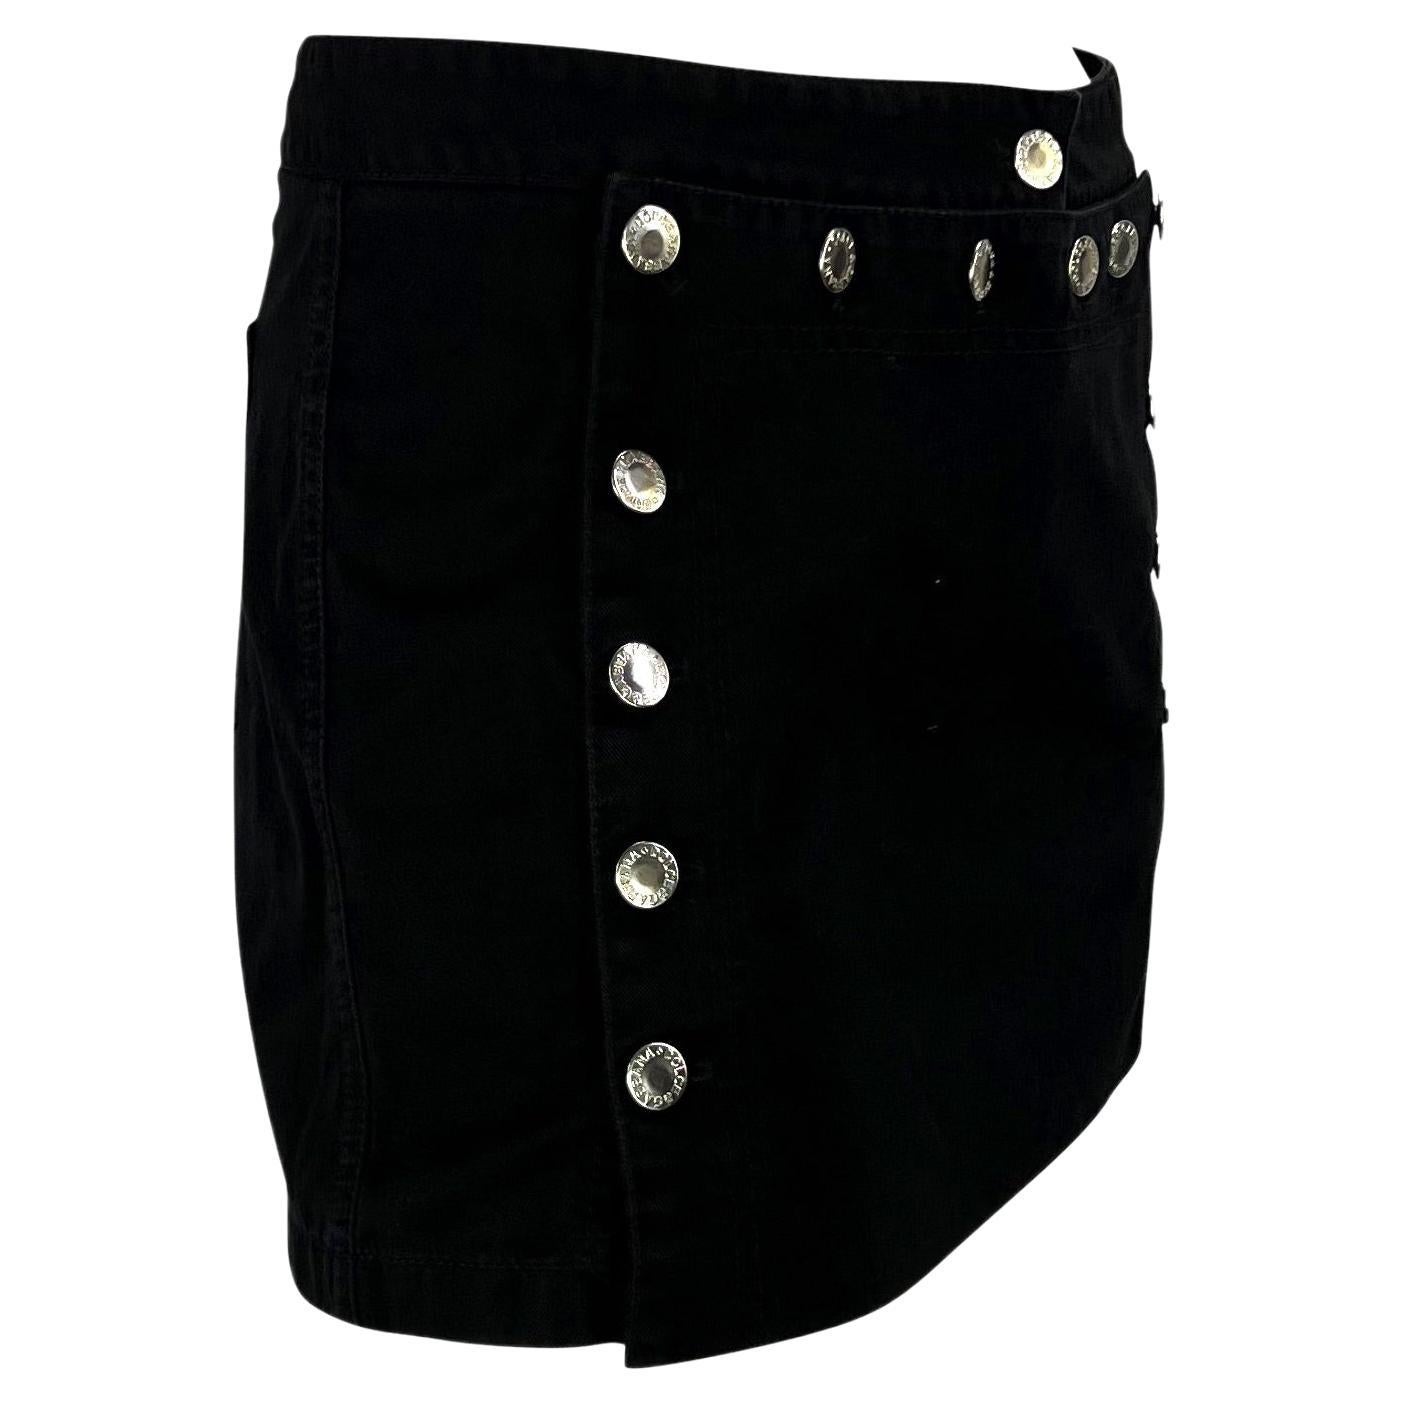 S/S 2003 Dolce & Gabbana 'Sex & Love' Flap Front Lace Up Mini Skirt For Sale 3